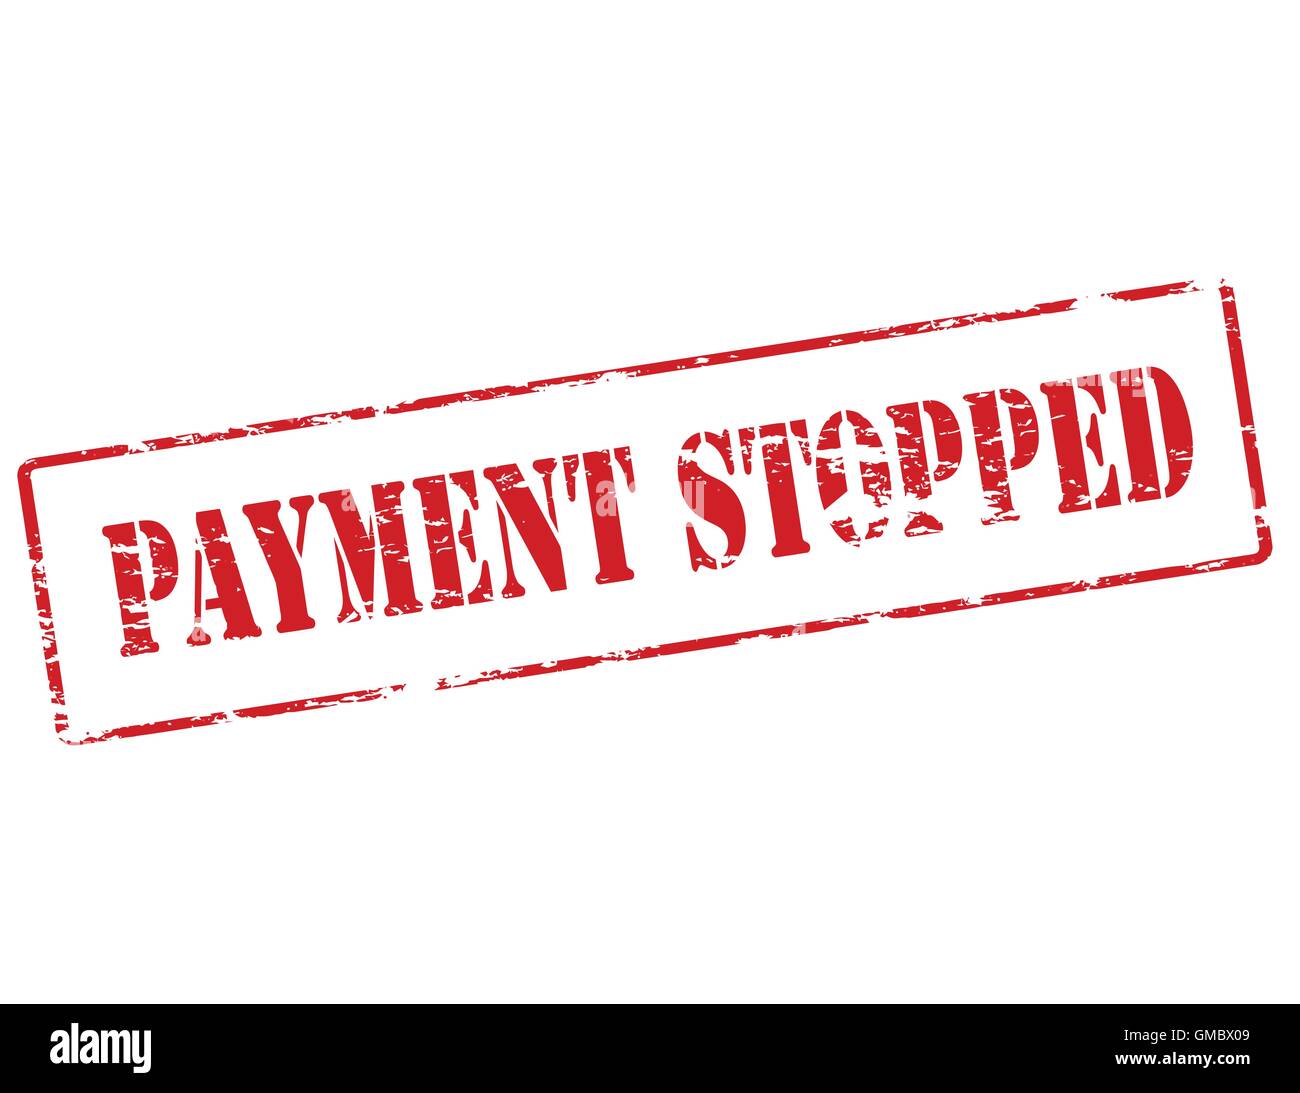 Payment stopped Stock Vector